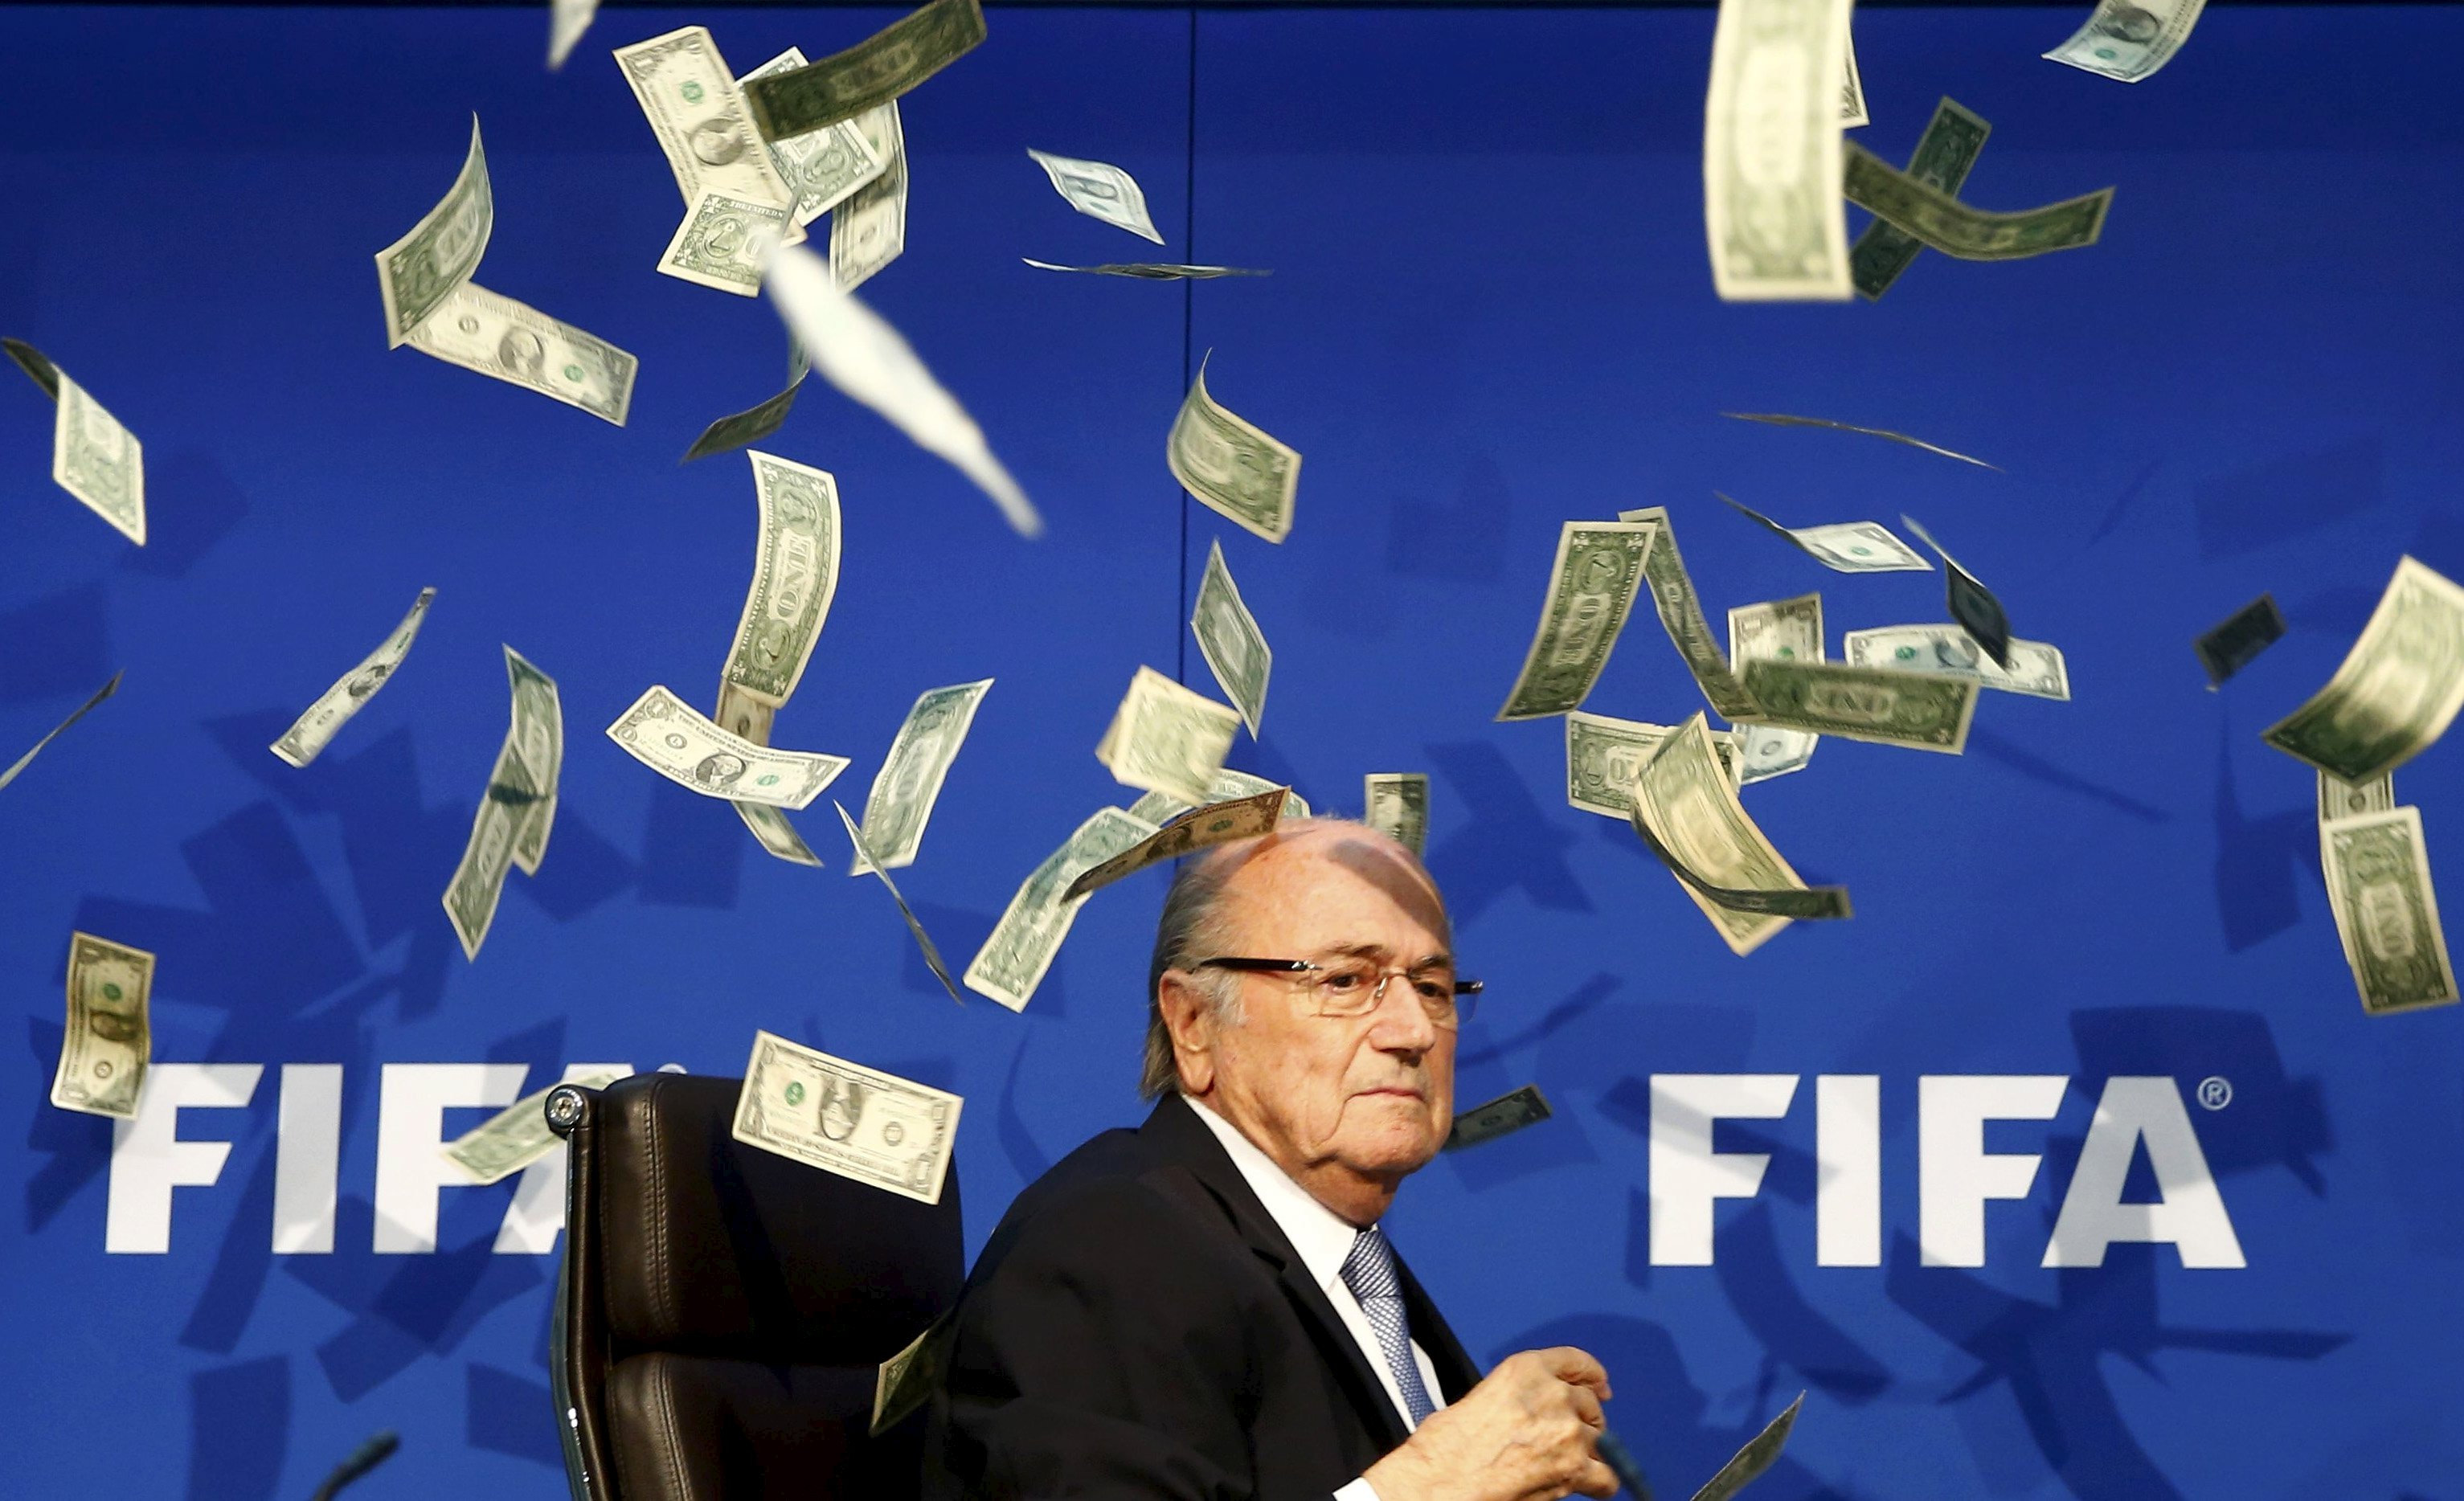 British comedian known as Lee Nelson (unseen) throws banknotes at FIFA President Sepp Blatter as he arrives for a news conference after the Extraordinary FIFA Executive Committee Meeting at the FIFA headquarters in Zurich, Switzerland in this July 20, 2015 file photo. REUTERS/Arnd Wiegmann/Files